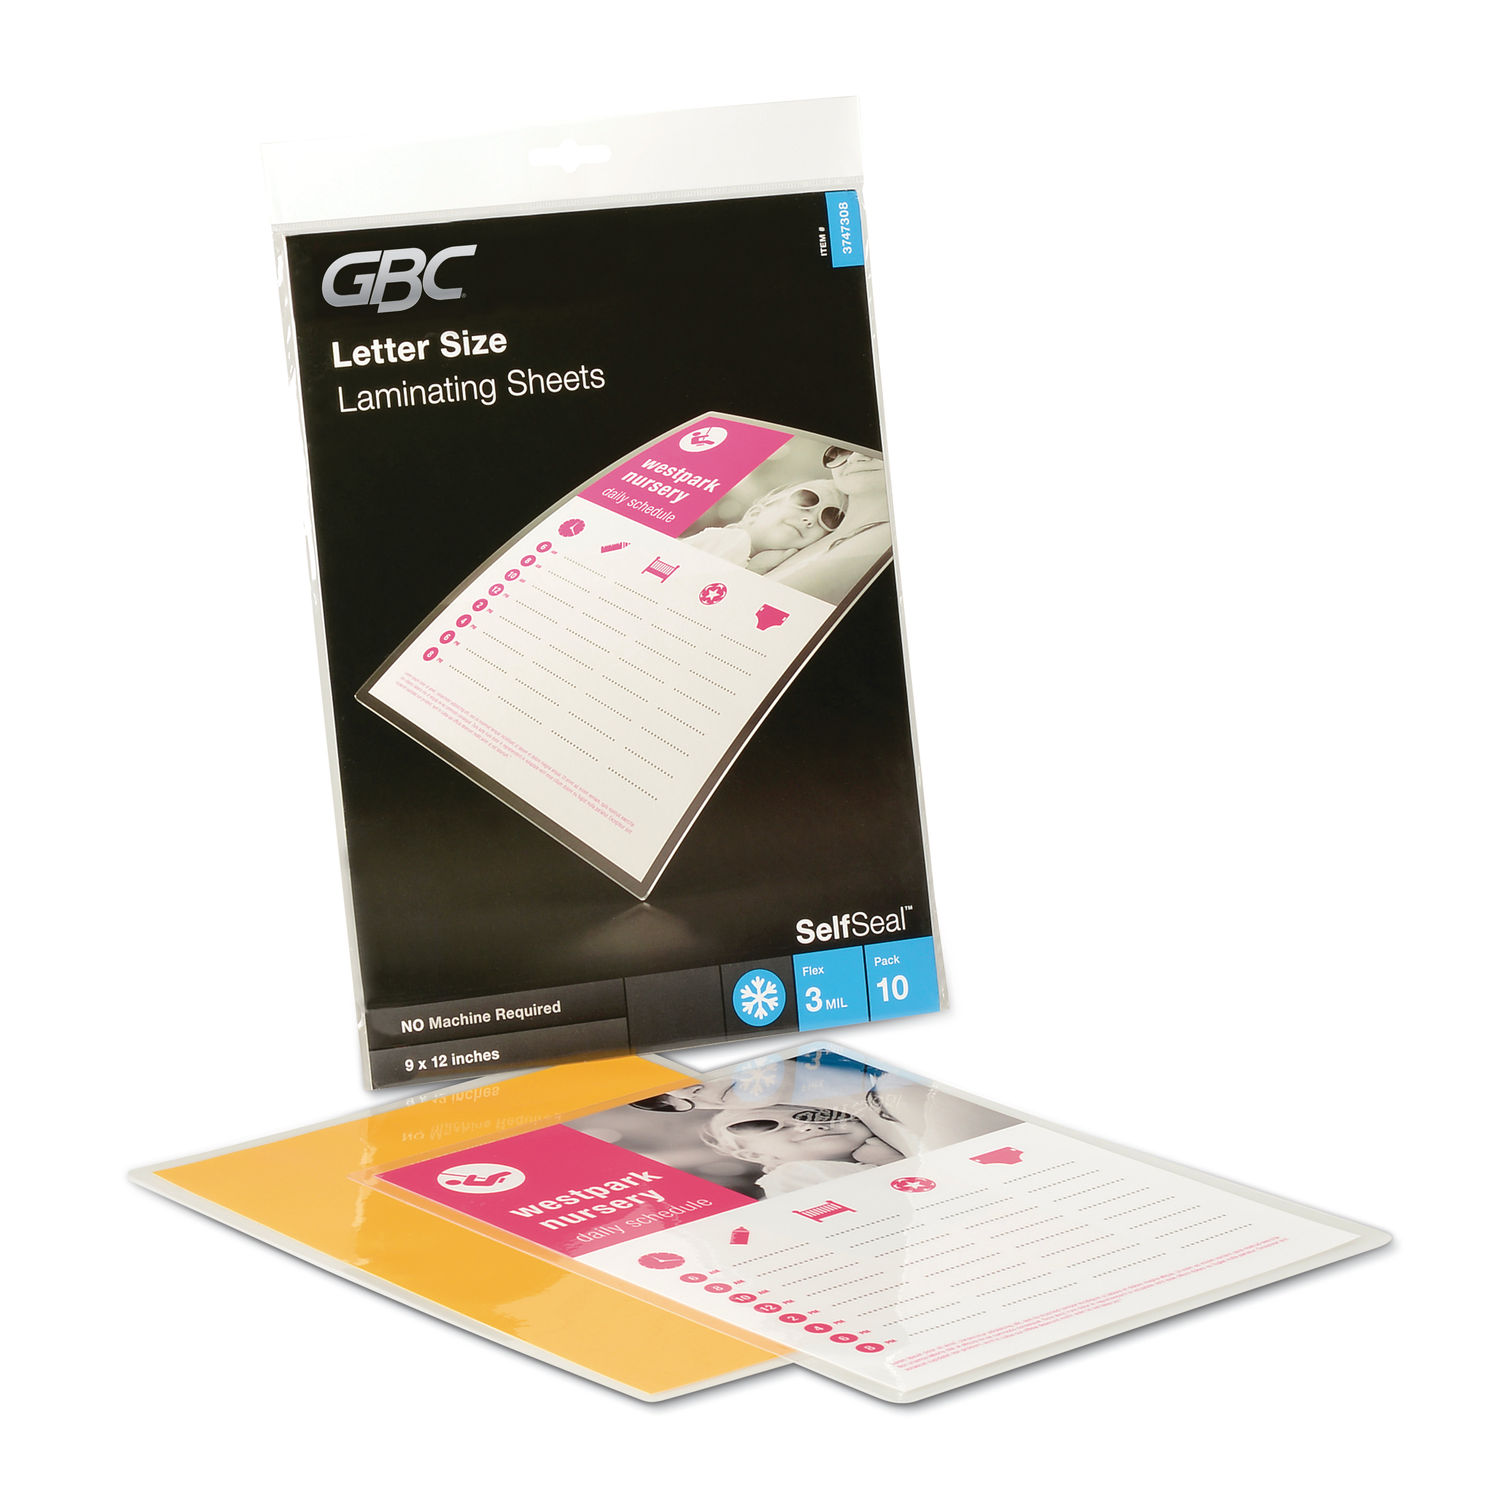 SelfSeal Self-Adhesive Laminating Pouches and Single-Sided Sheets by GBC®  GBC3747308